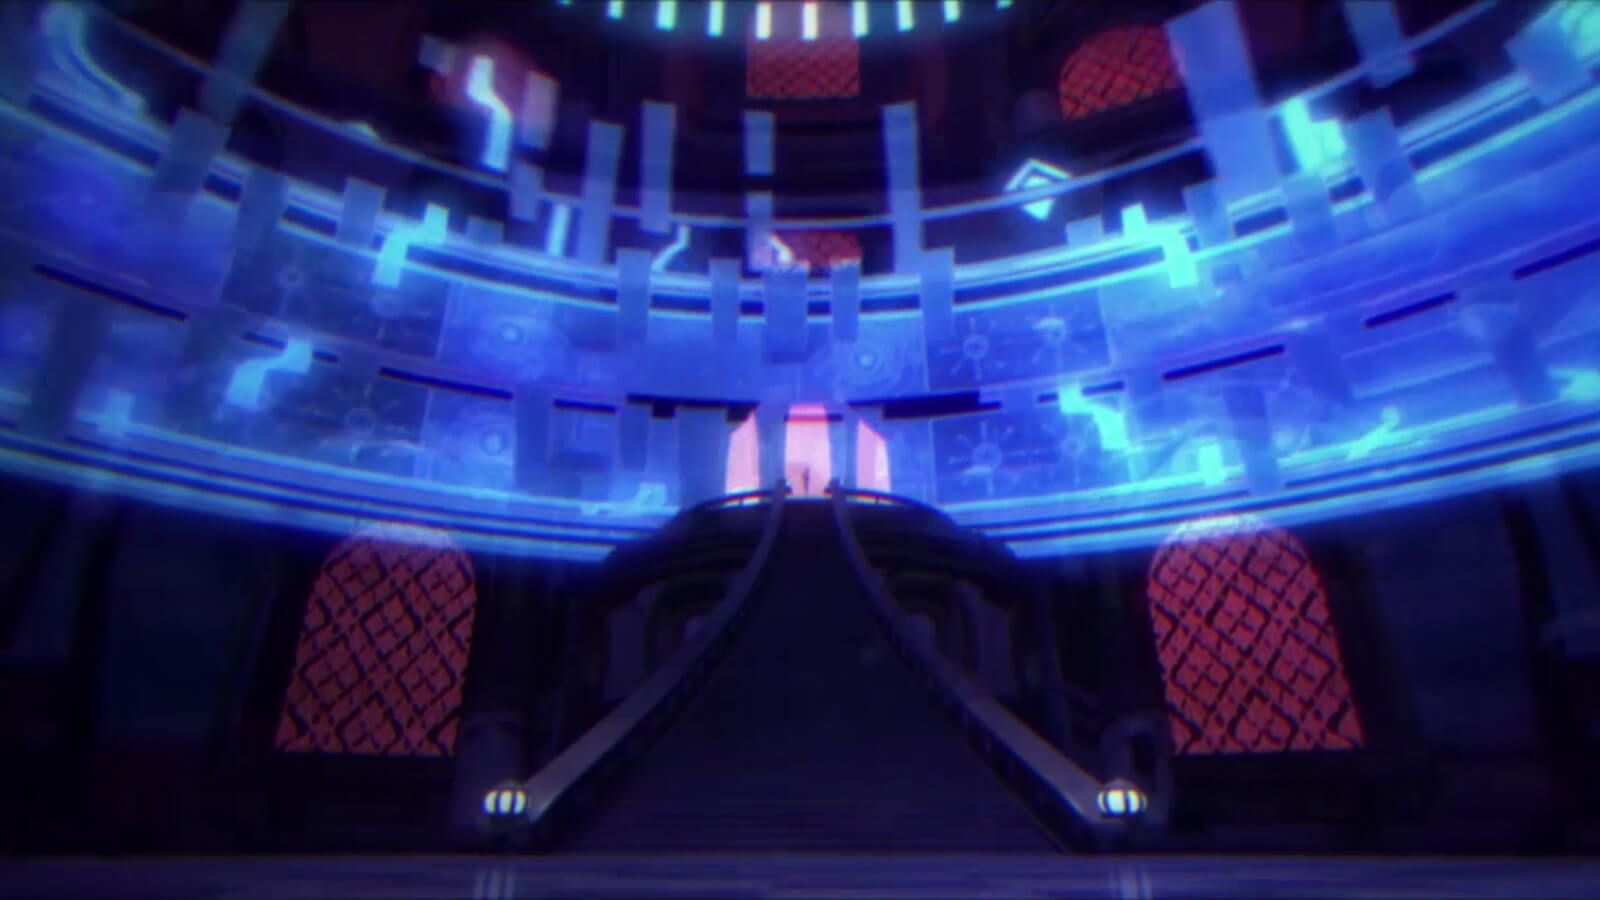 Grand staircase flanked by arched windows below a ring of futuristic, abstract imagery glowing blue